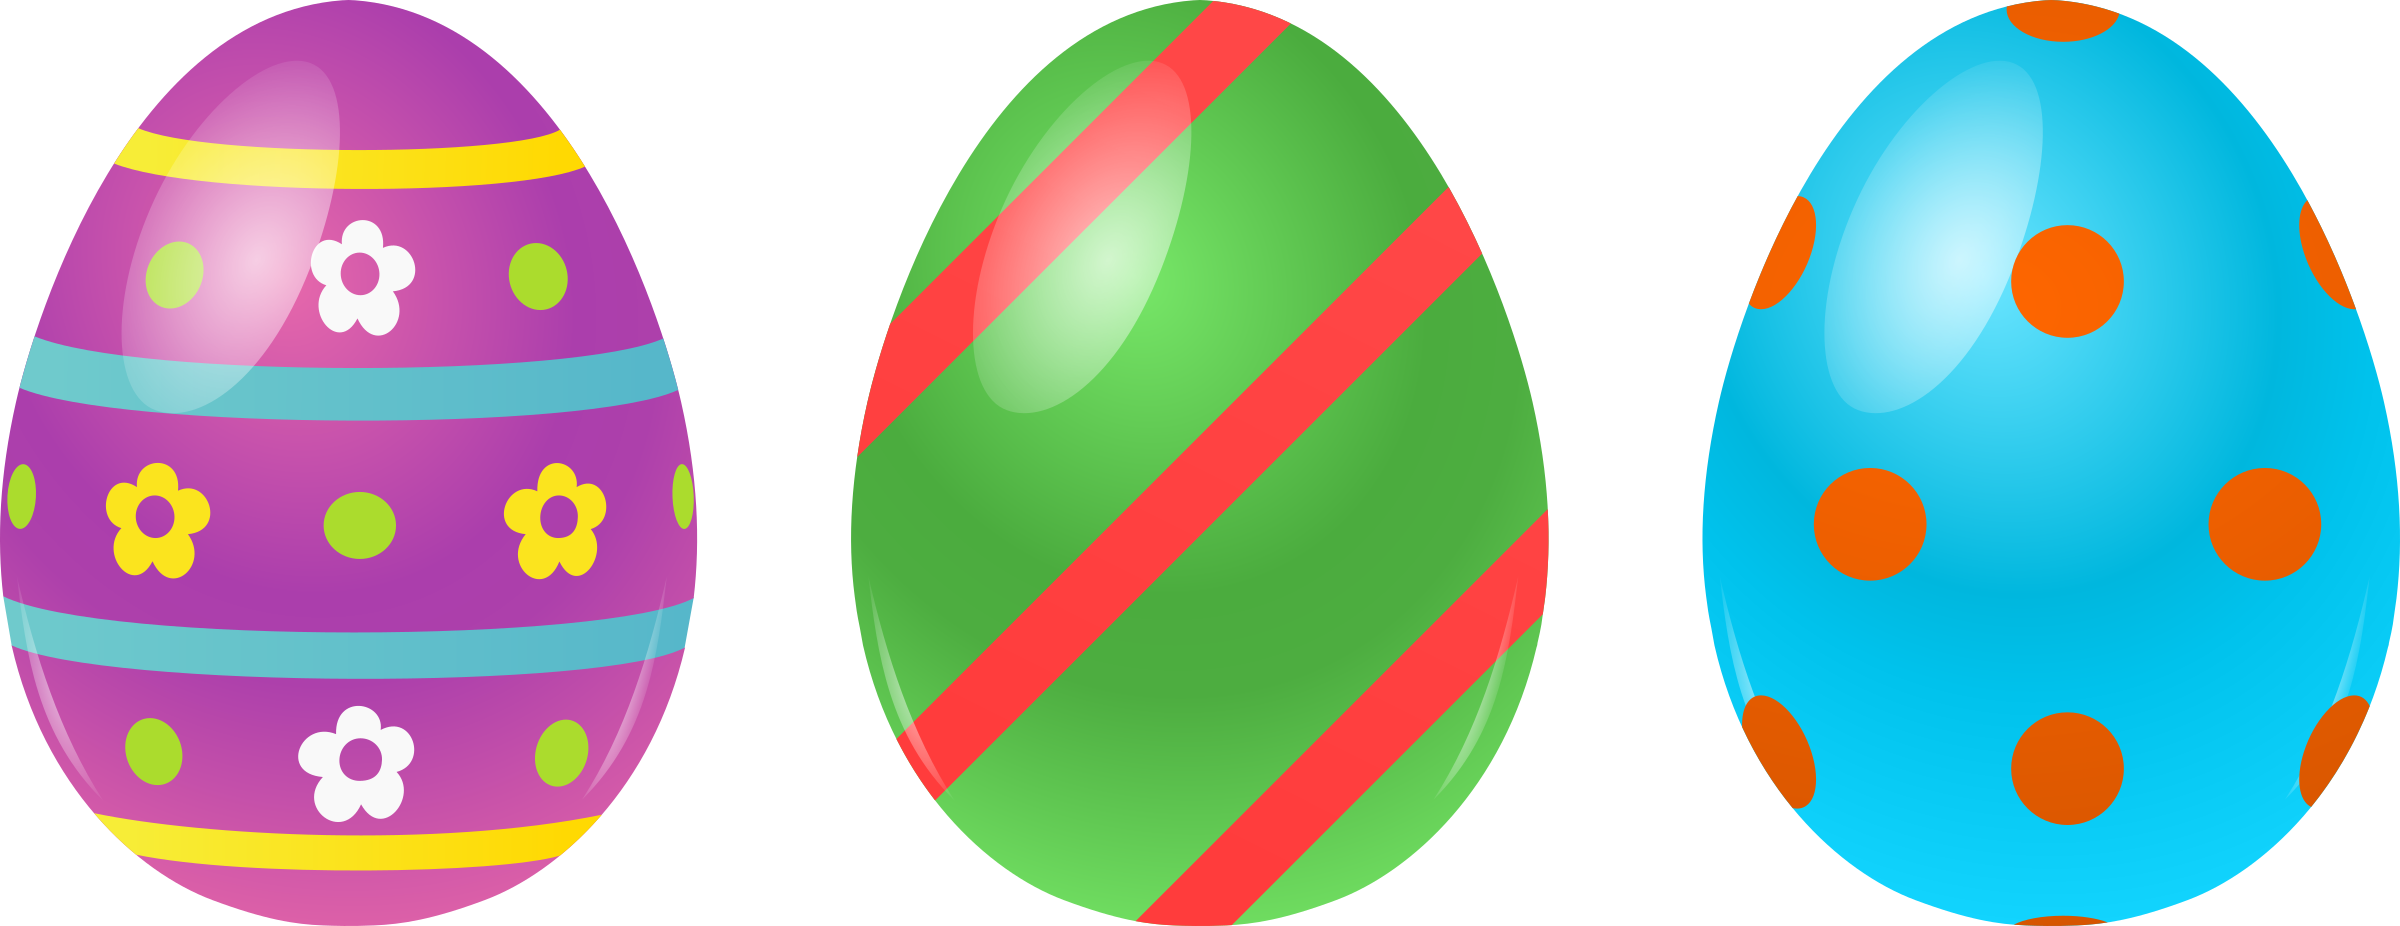 Free Three Colorful Easter Eggs Clip Art - Free Easter Egg Clipart (2400x926)